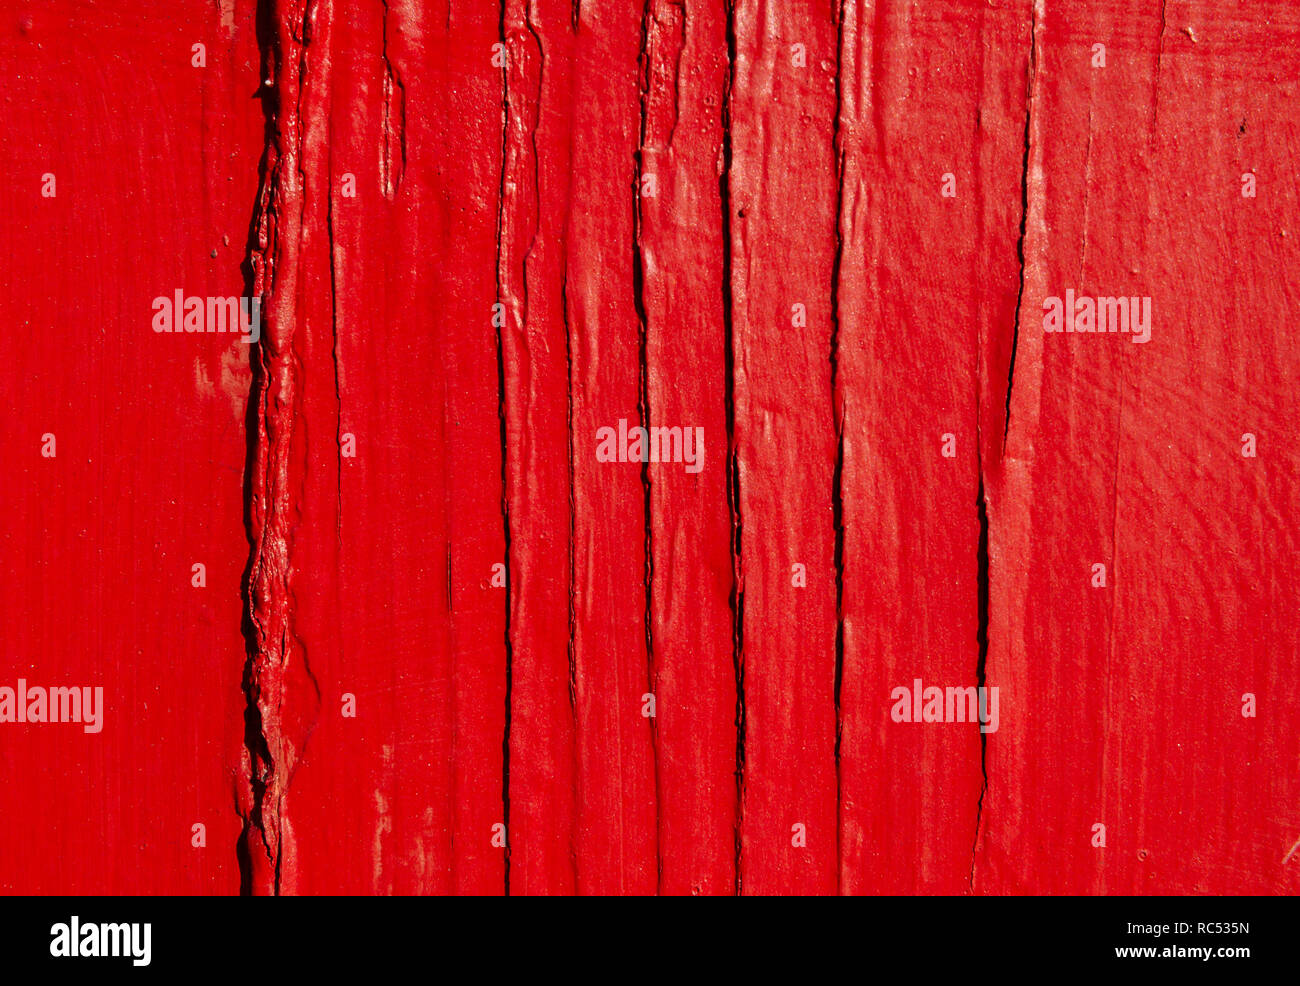 Rough, weathered wood is painted red with cracked, peeling paint, Dec. 23, 2018, in Mobile, Alabama. Stock Photo